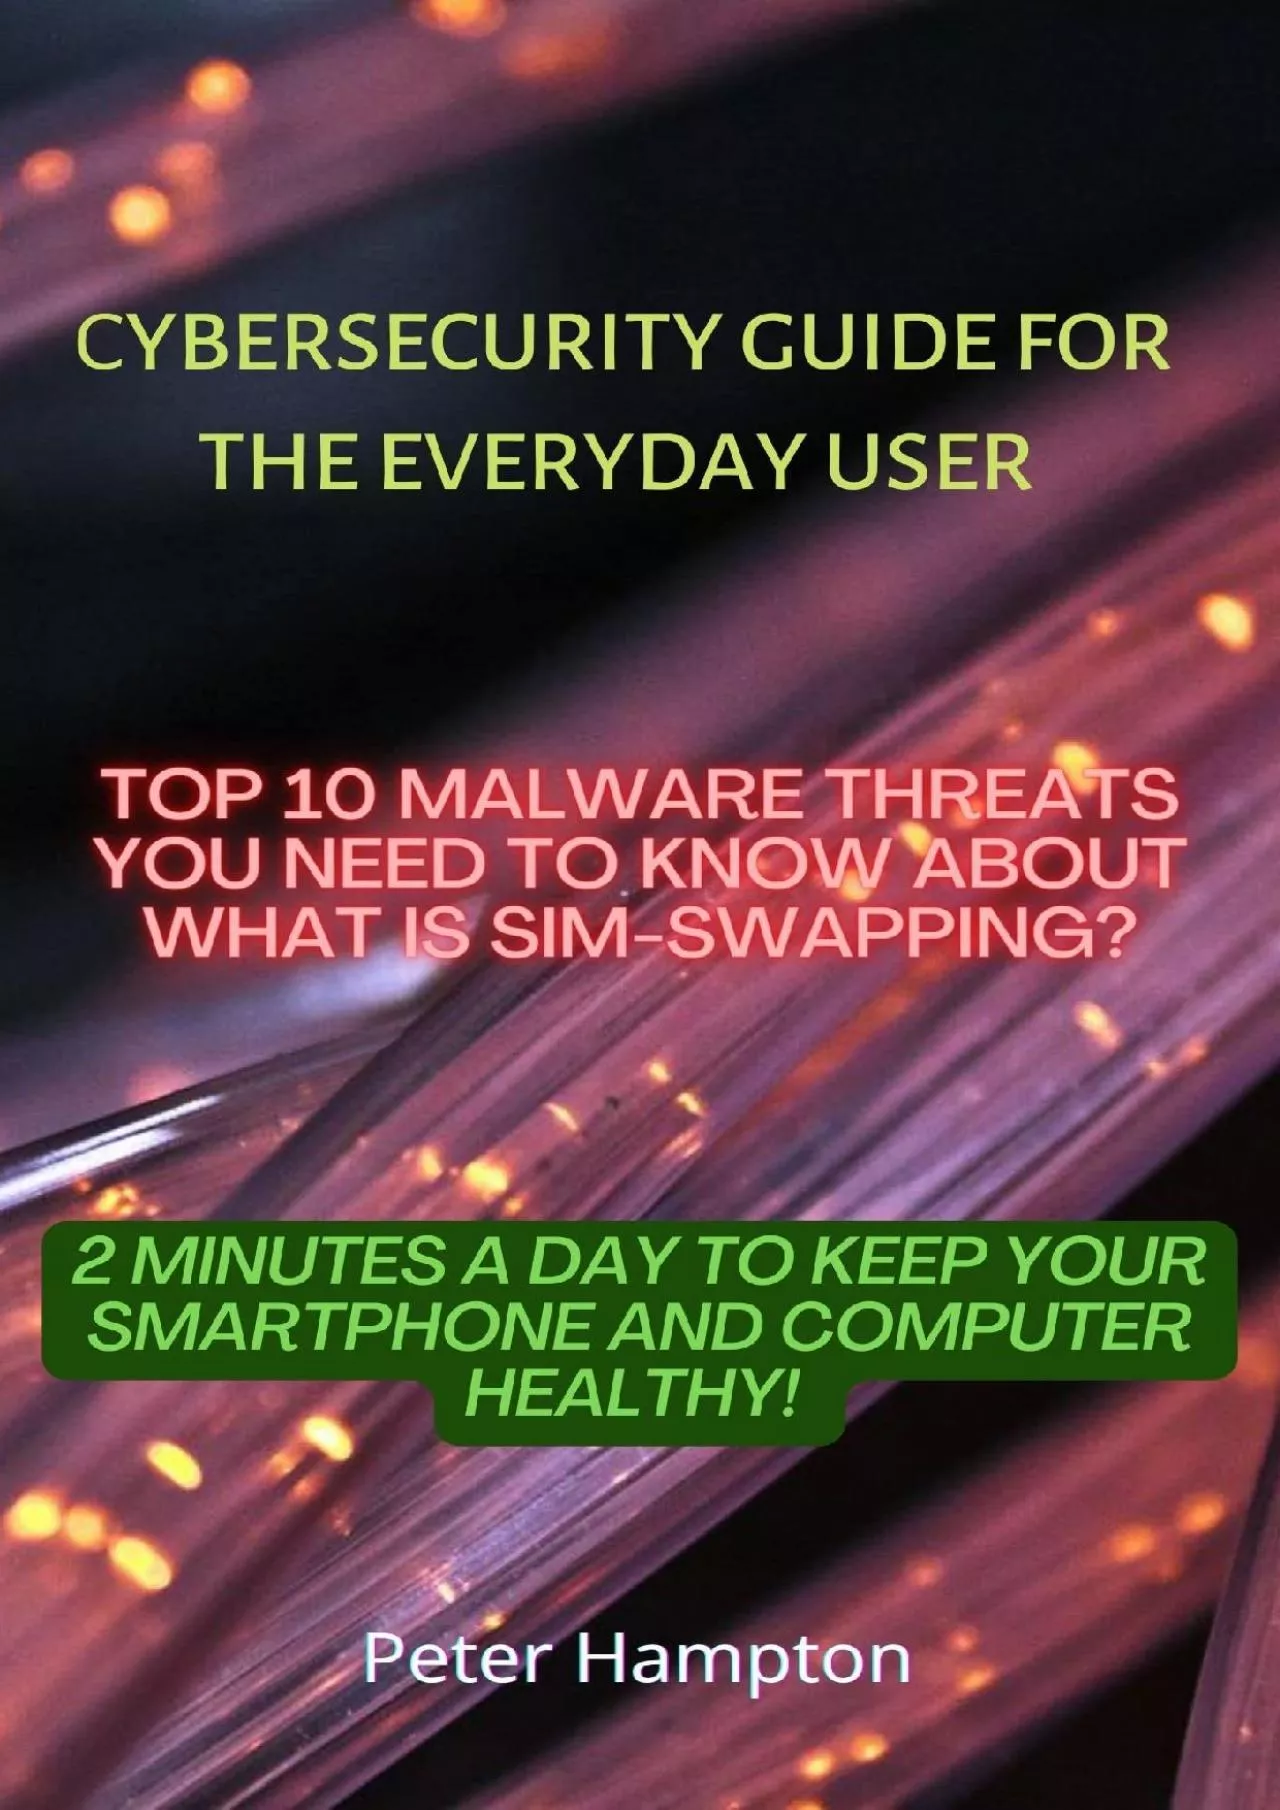 [DOWLOAD]-Cybersecurity Guide for the Everyday User: Top 10 Malware Threats You Need to